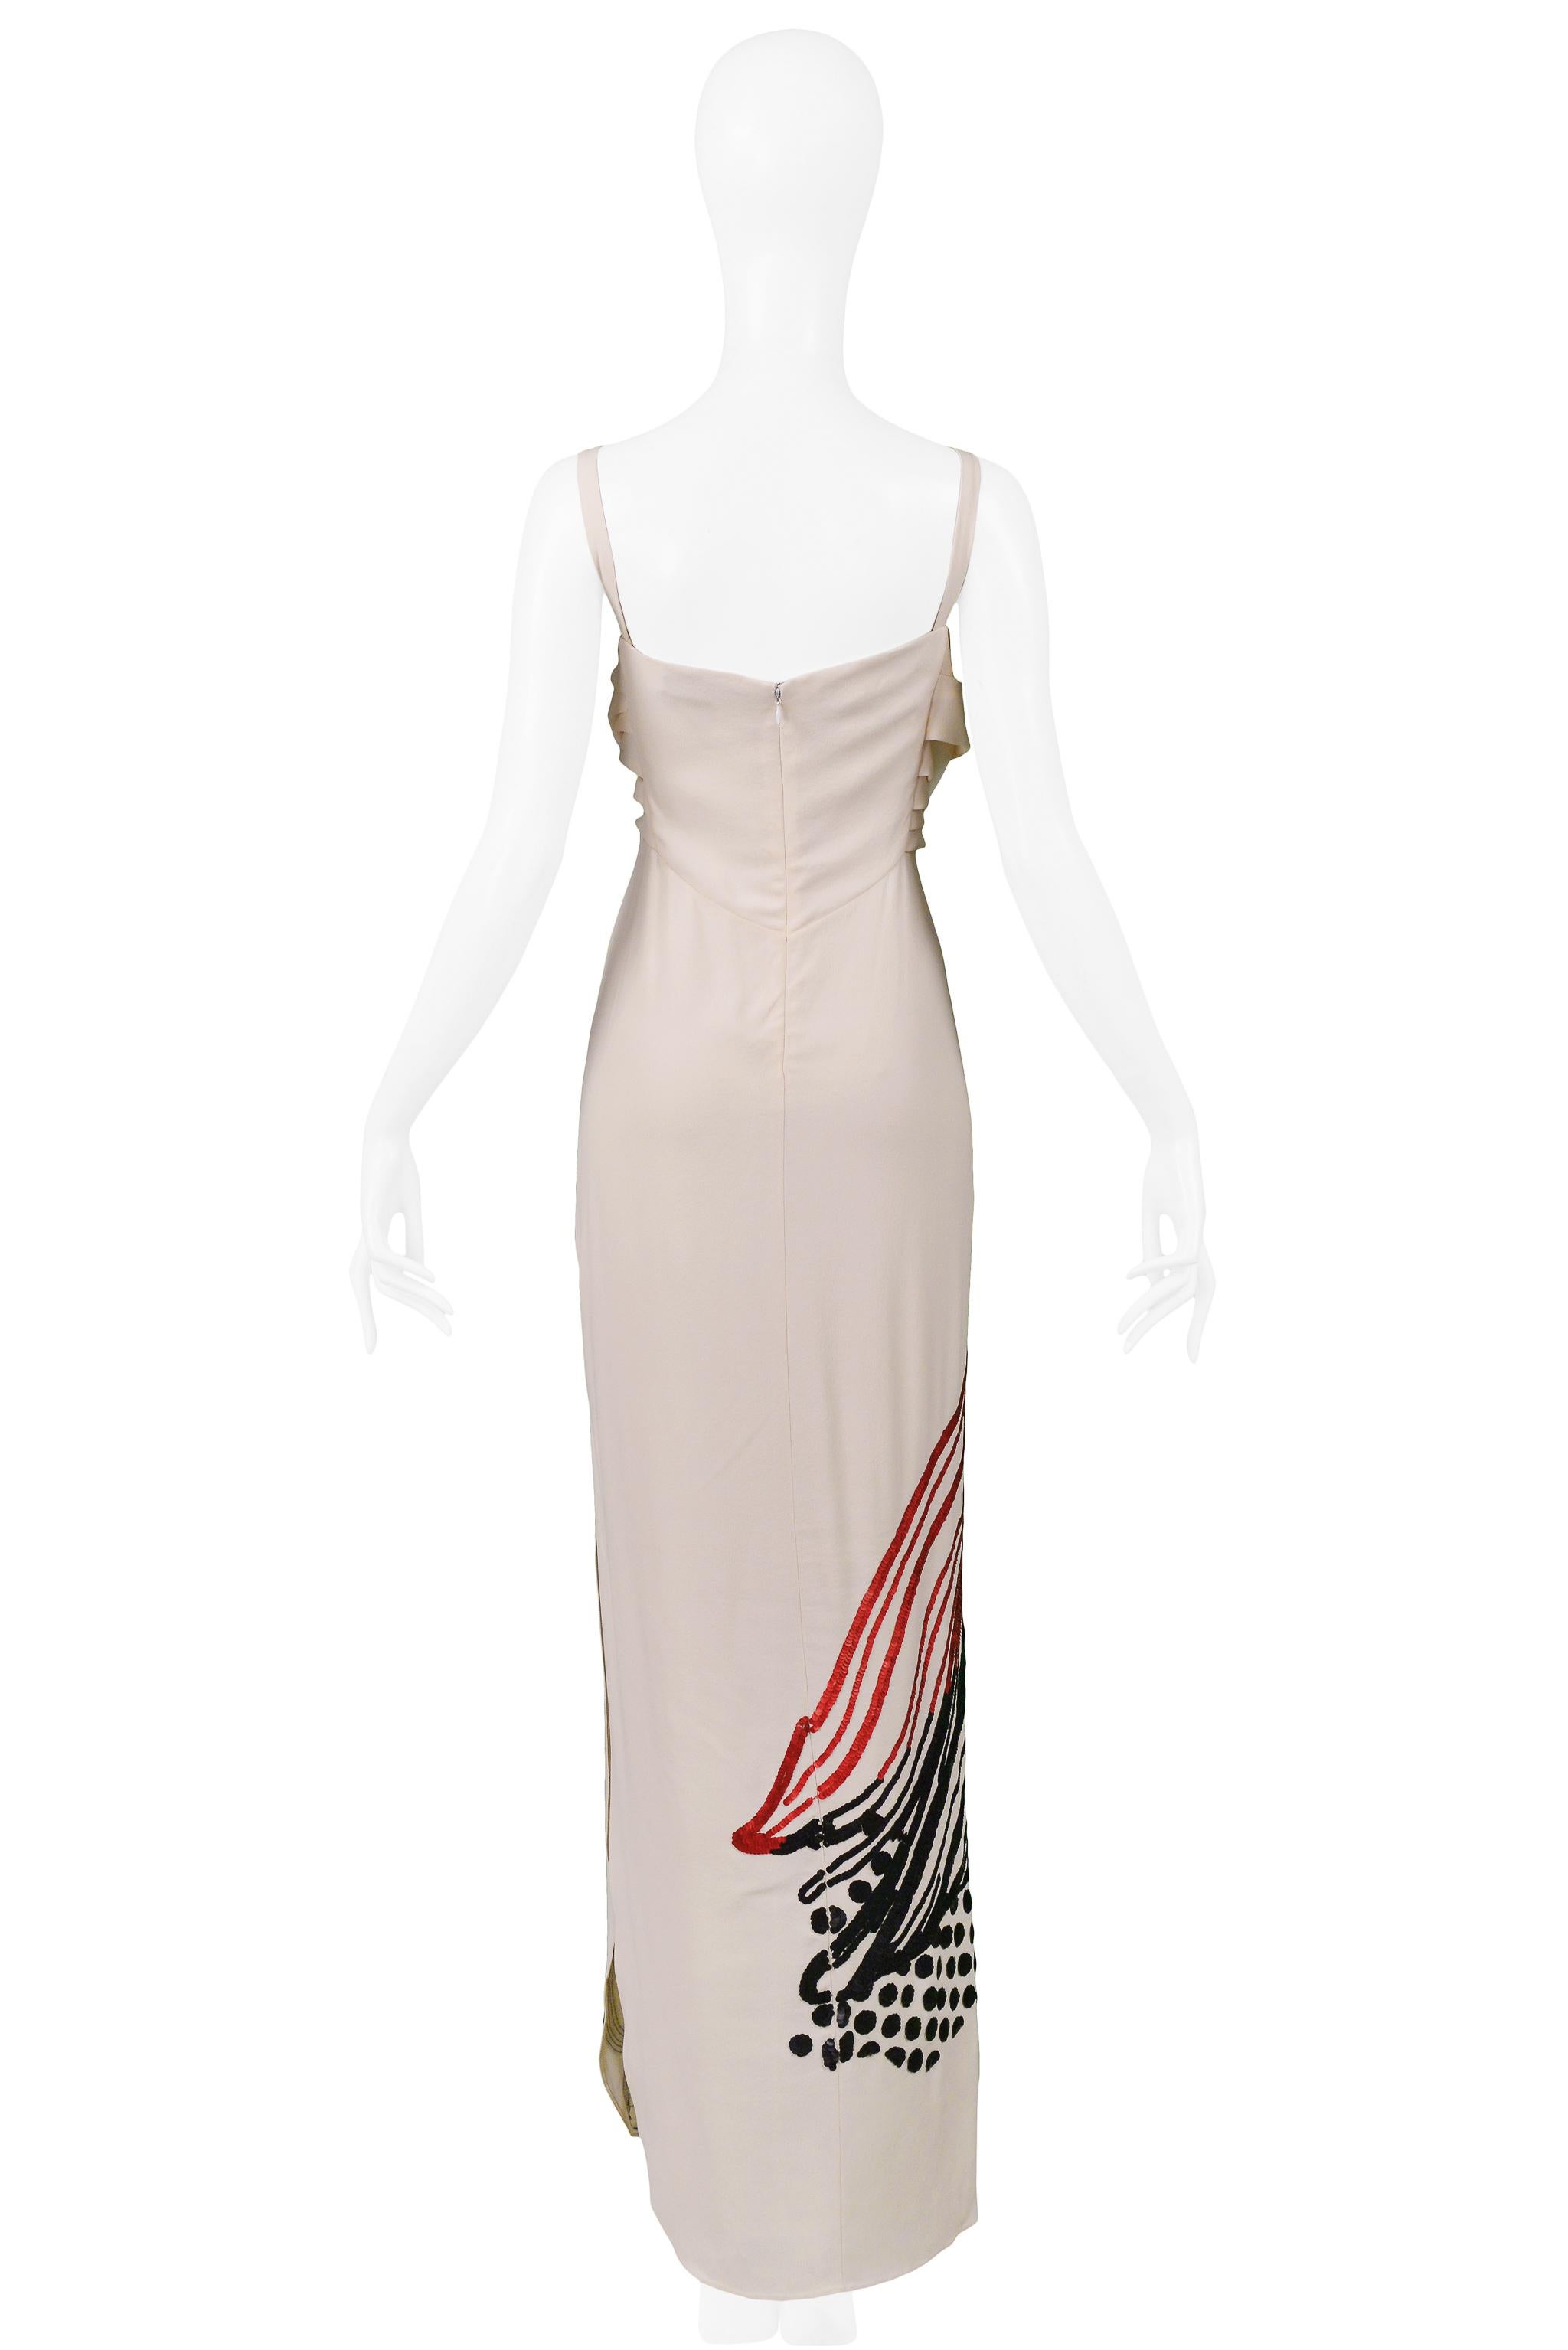 Vintage John Galliano Cream Gown with Black & Red Sequins 2007 For Sale 3